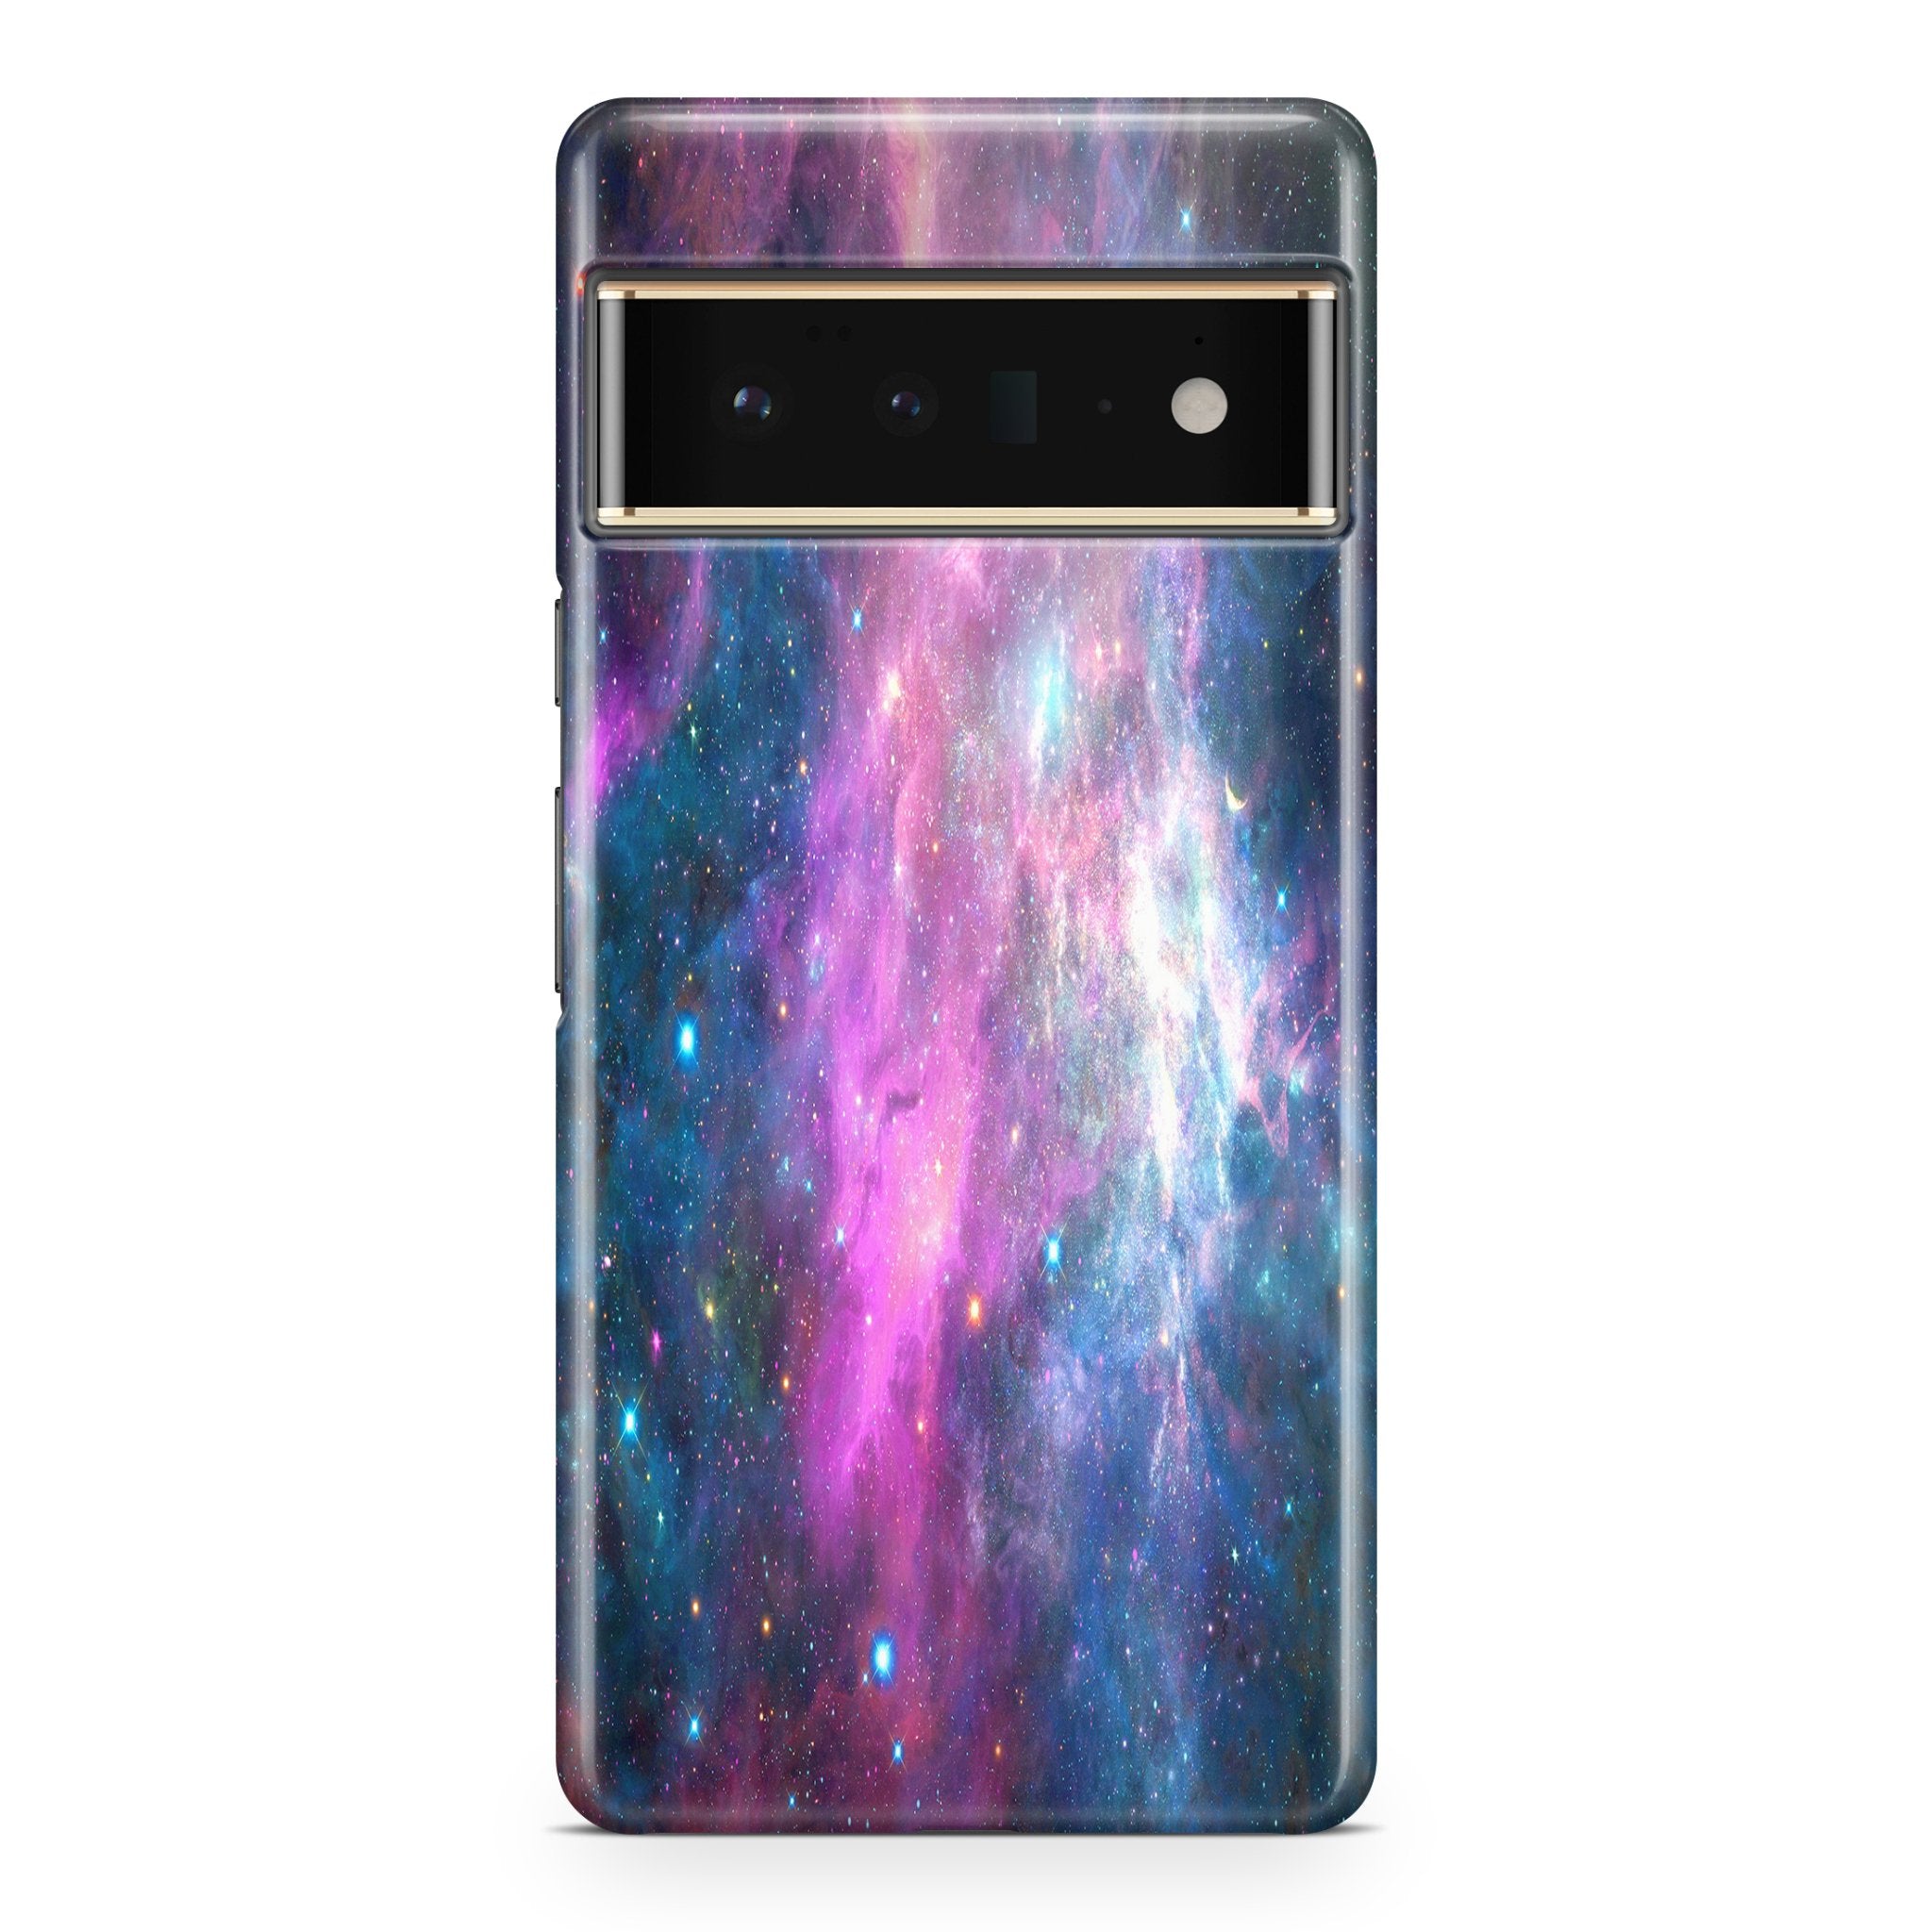 Space Galaxy - Google phone case designs by CaseSwagger